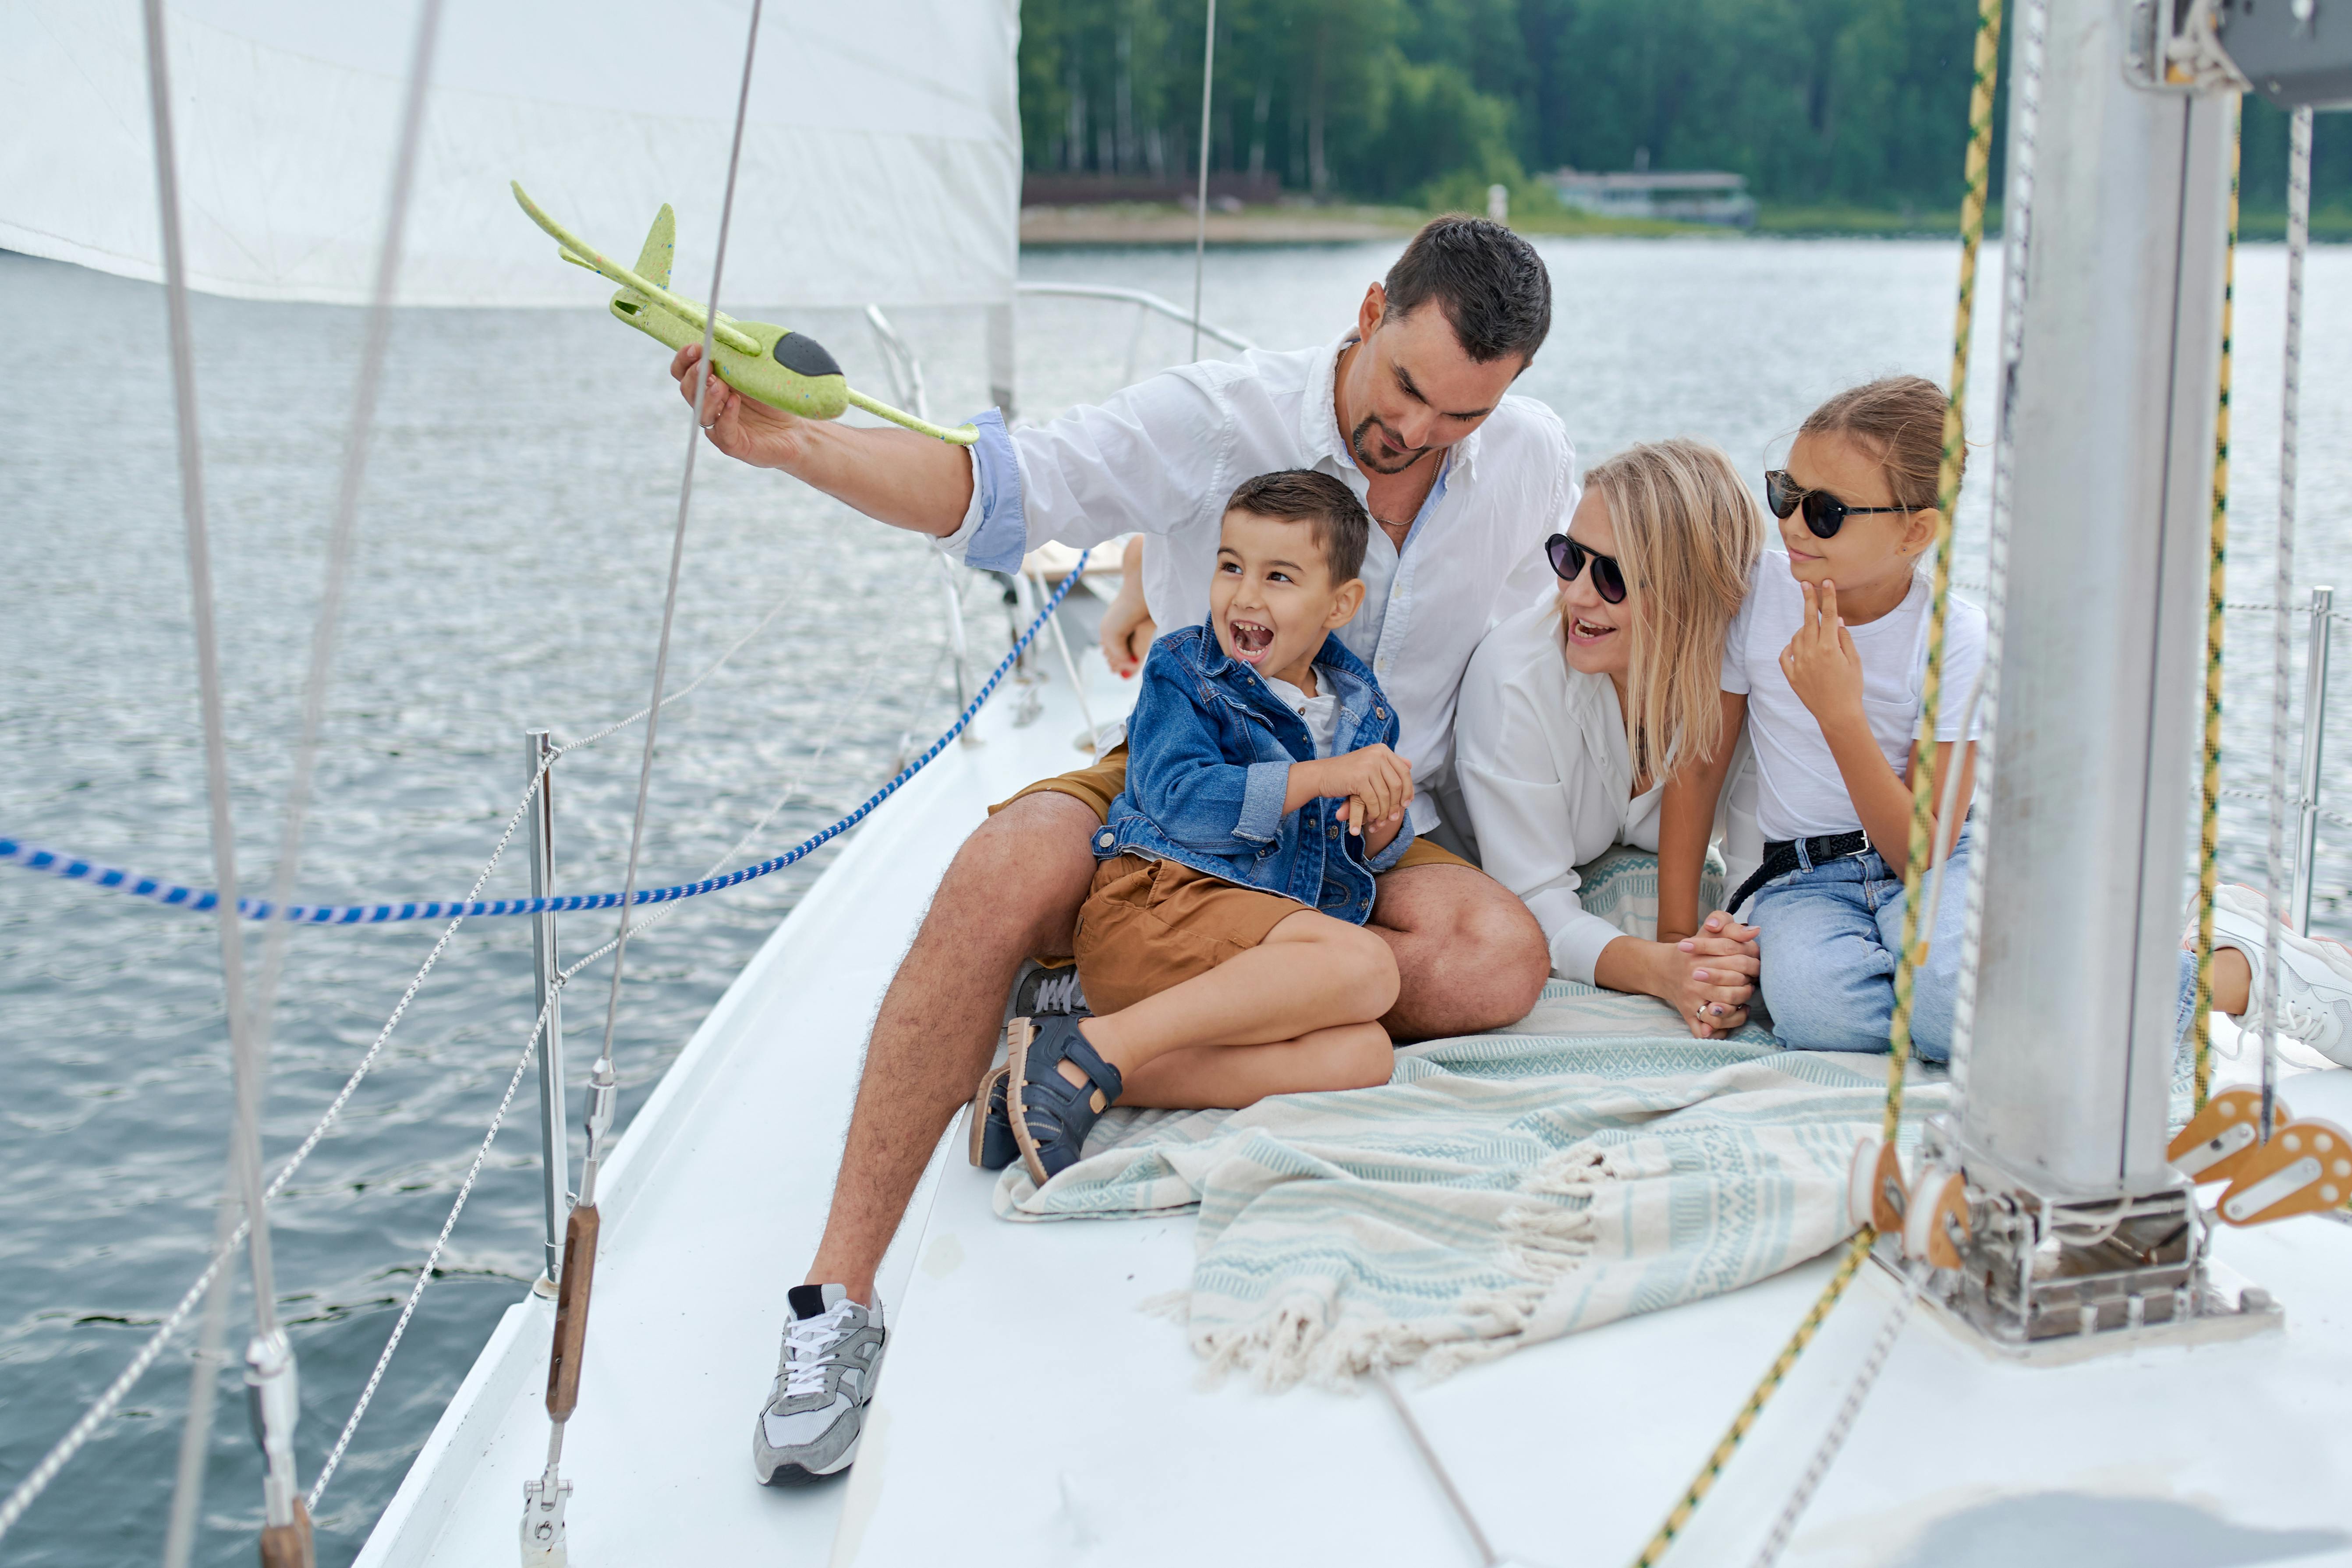 A wealthy family on their yacht | Source: Pexels